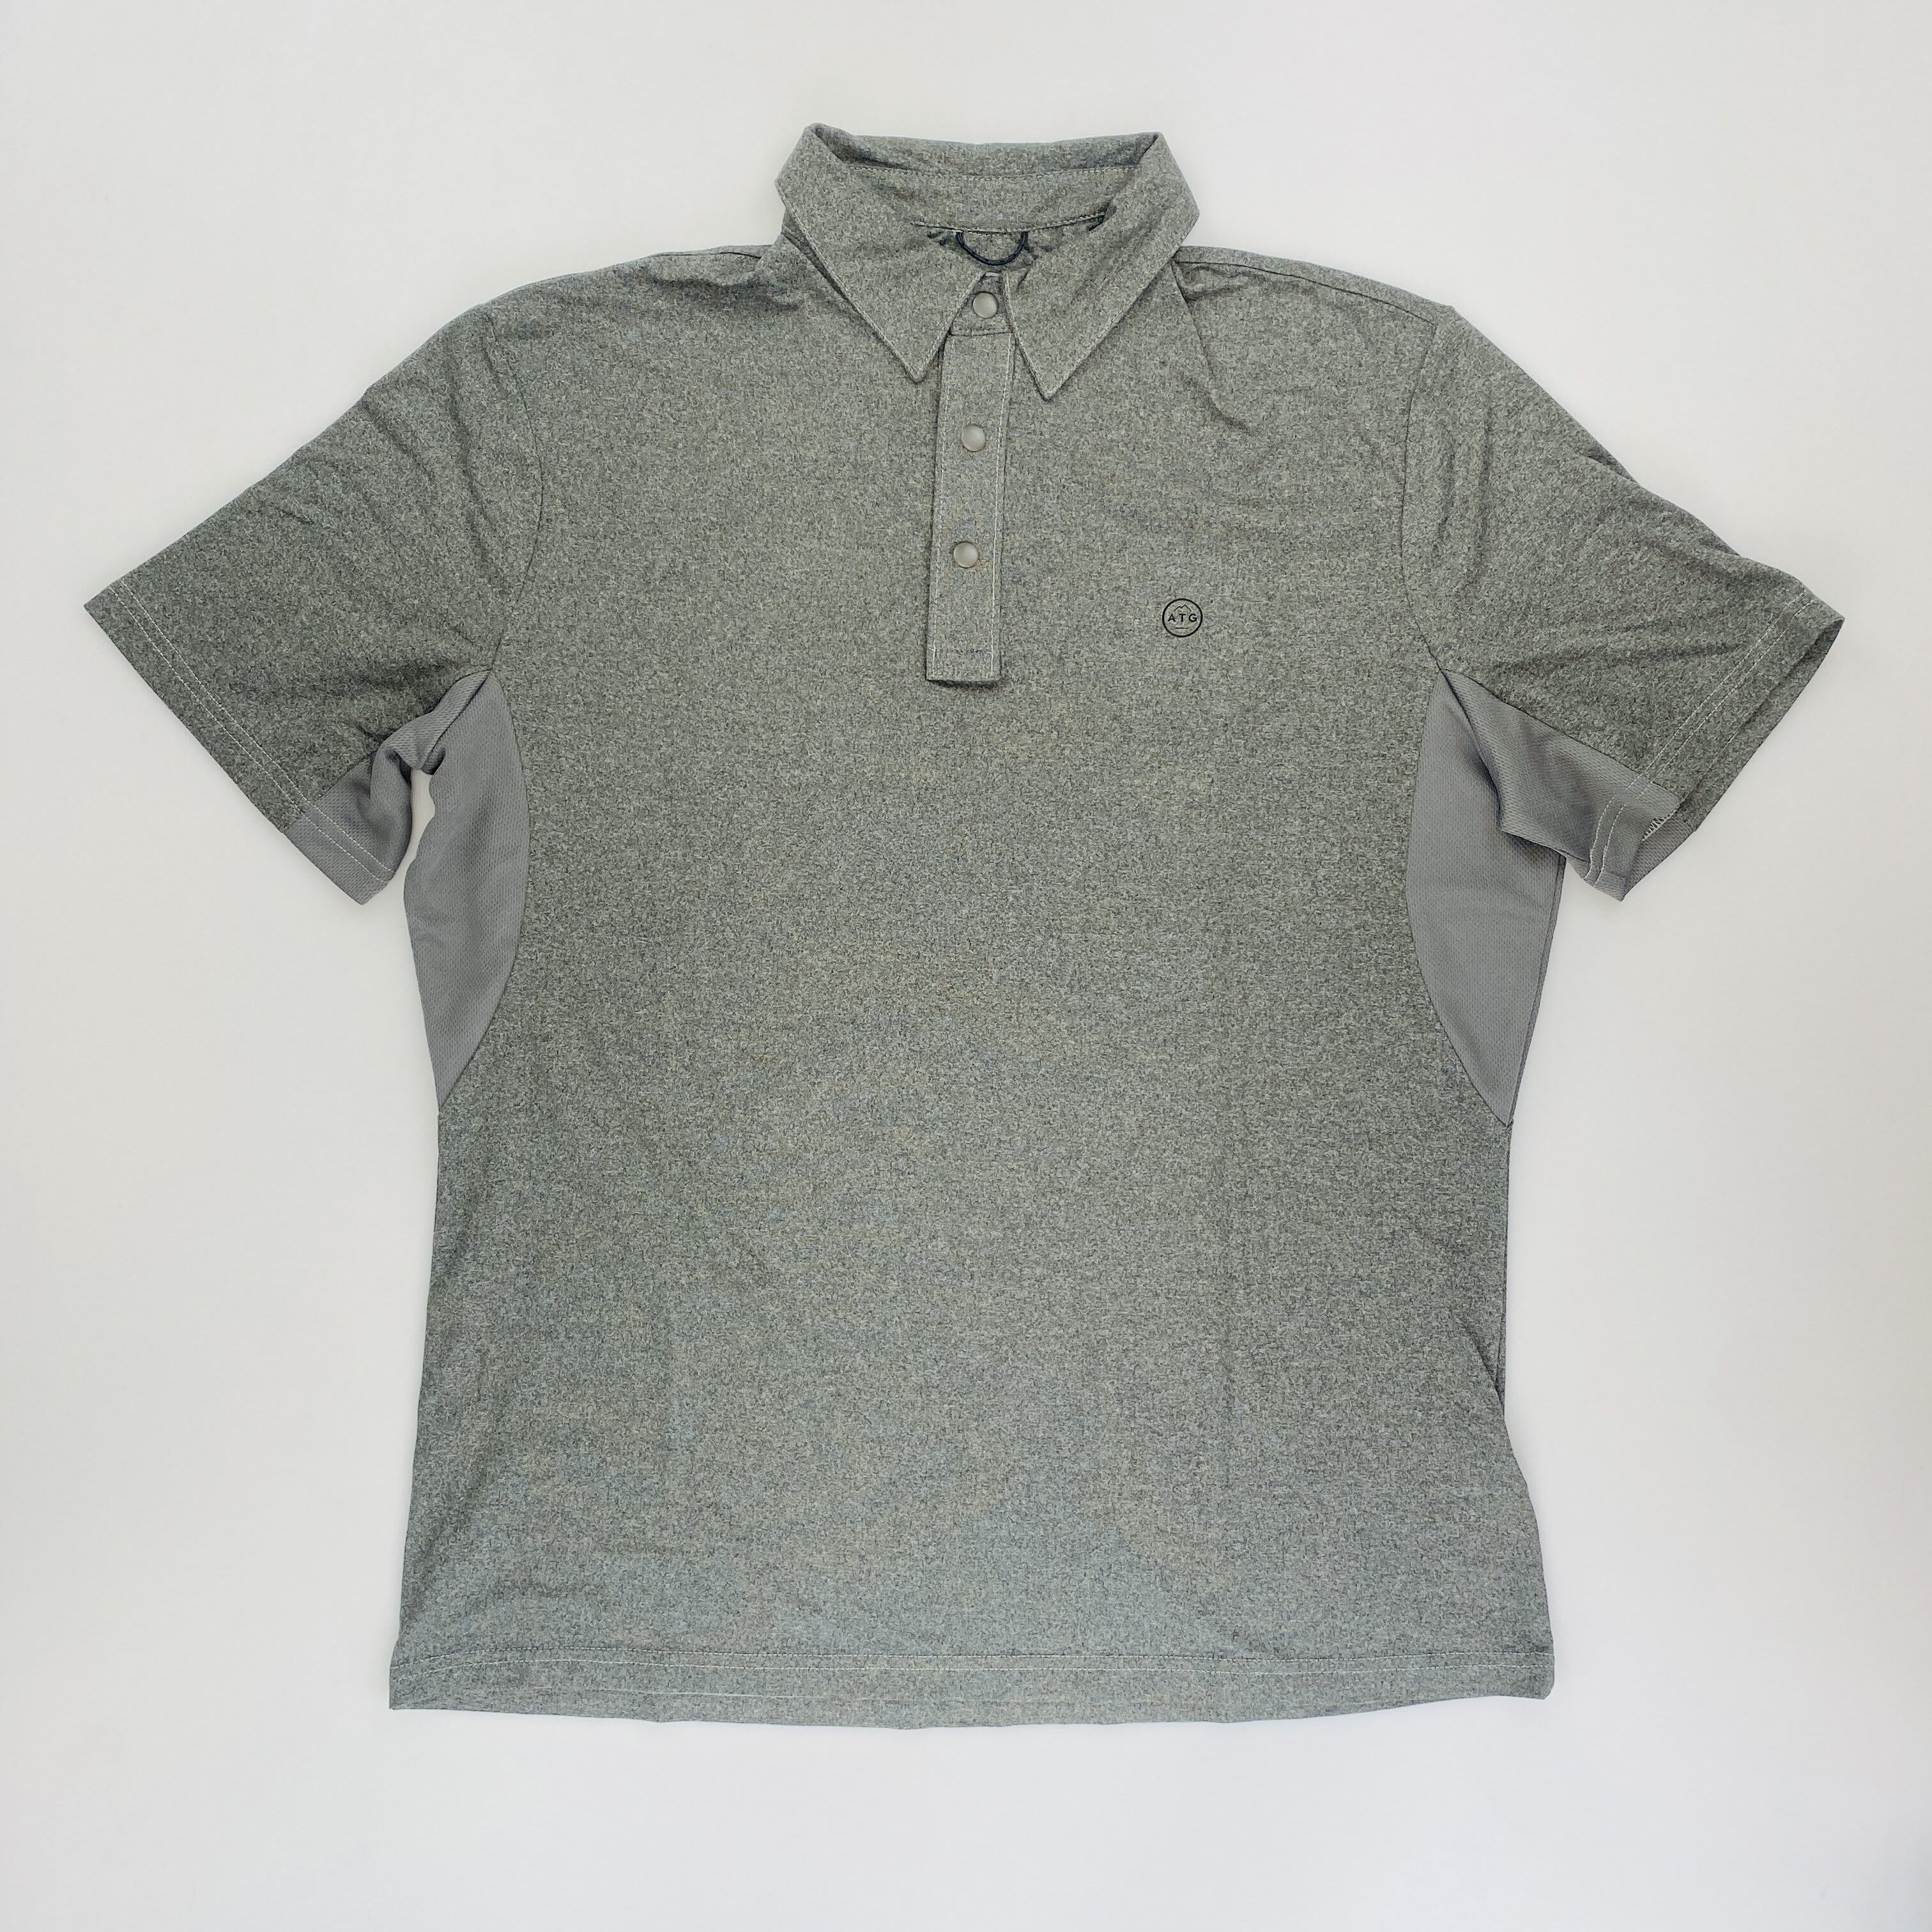 Wrangler Ss Performance Polo - Seconde main Polo homme - Gris - M | Hardloop